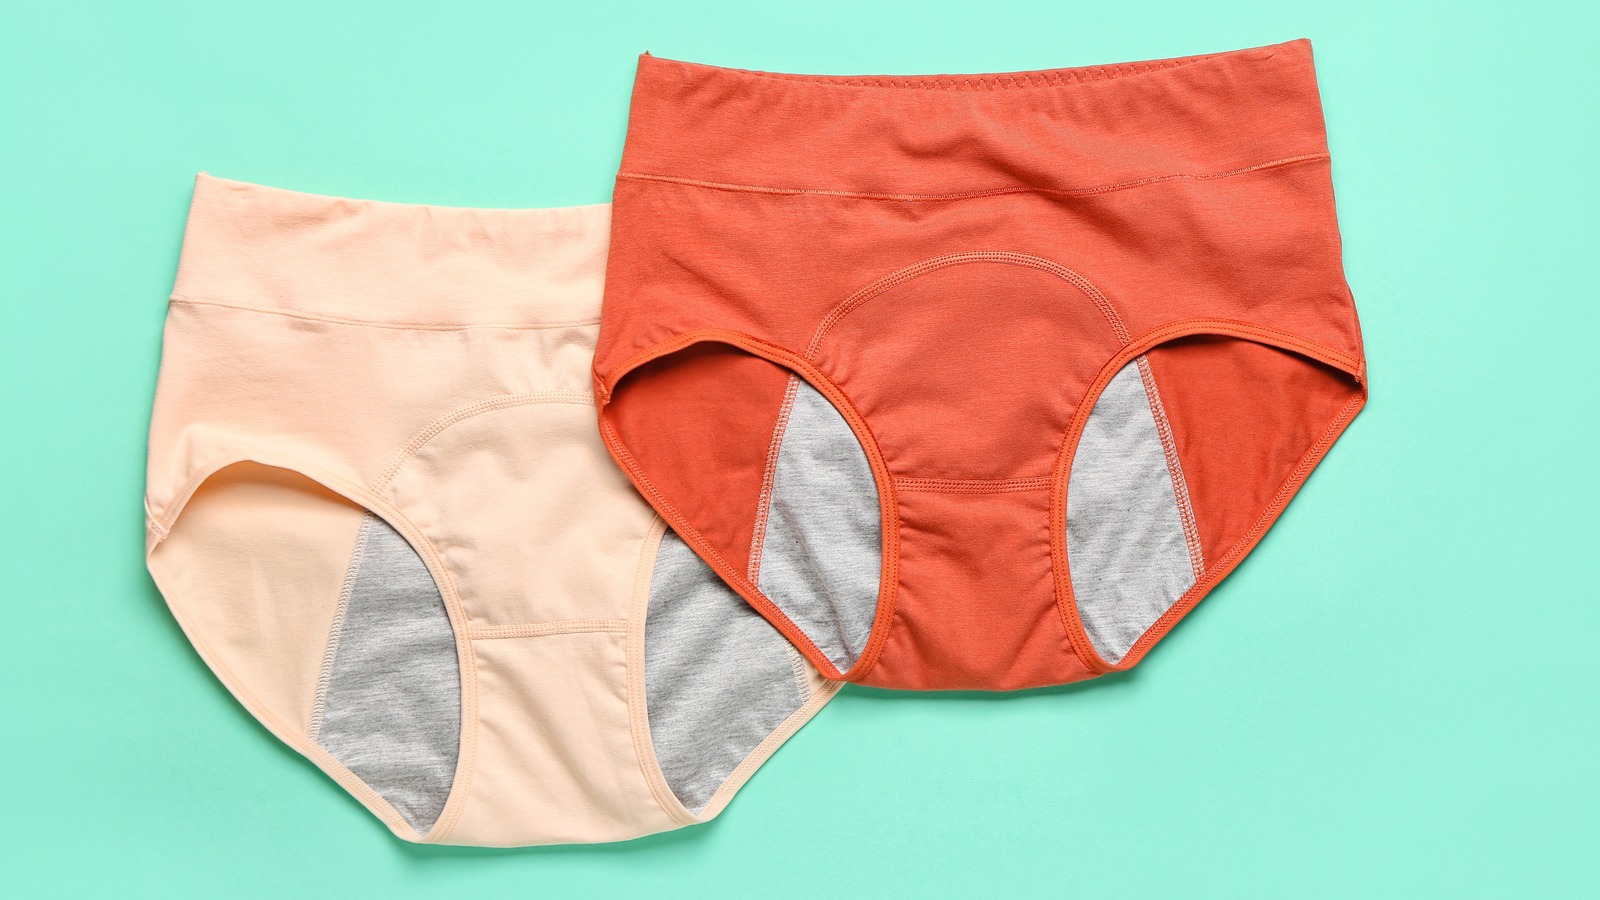 What We Know About The Thinx Underwear Lawsuit And How It May